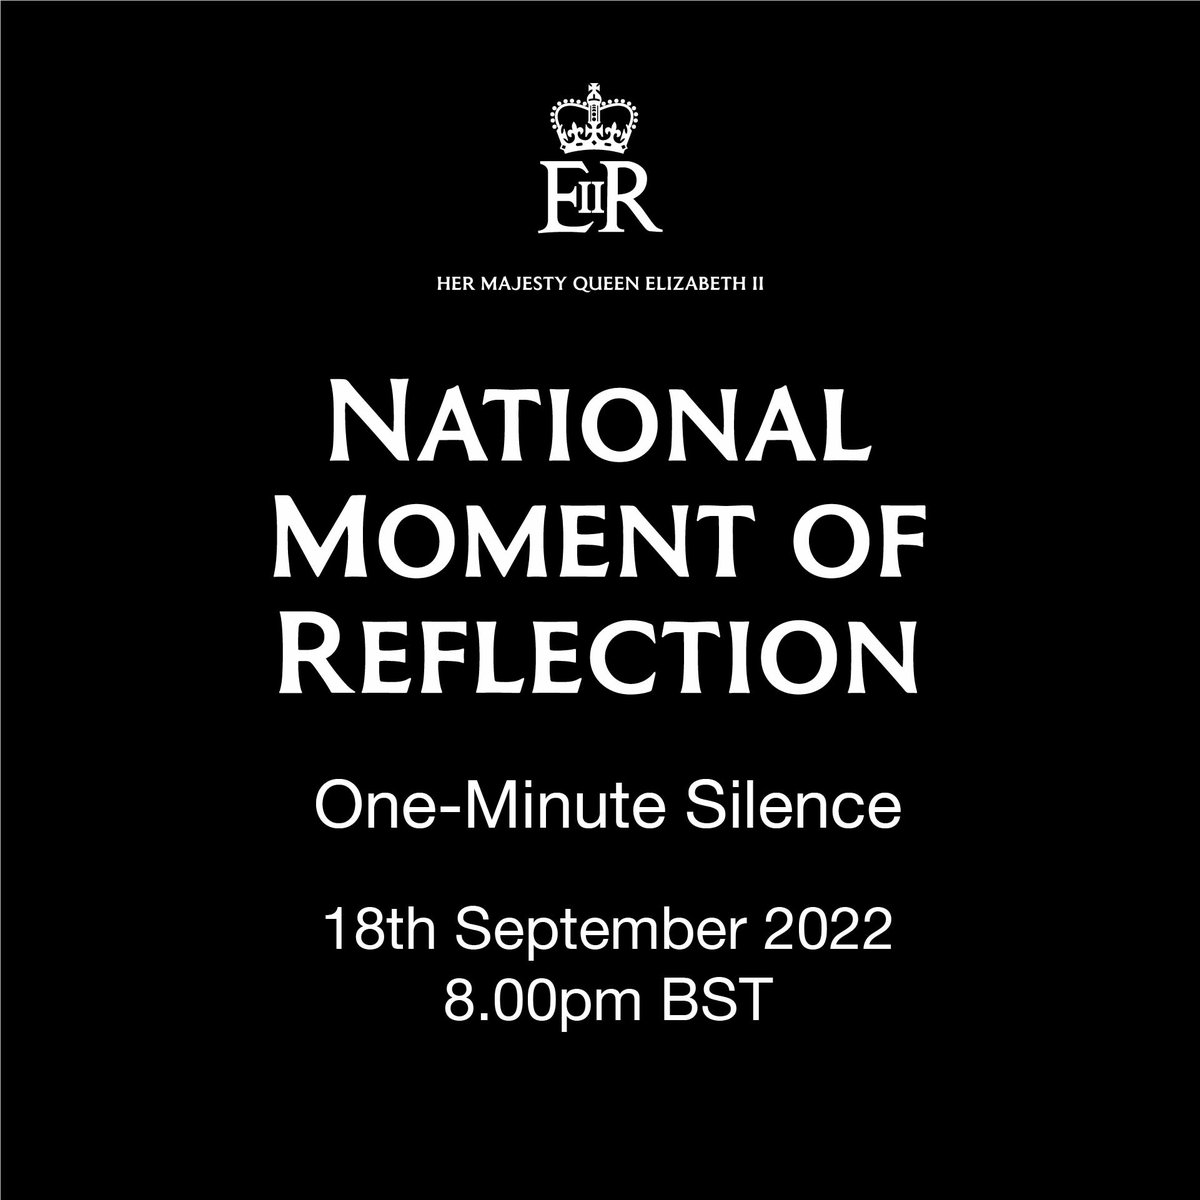 The National Moment of Reflection will take place at 8pm on Sunday night to mourn the passing of Her Majesty Queen Elizabeth II and reflect on her life and legacy.